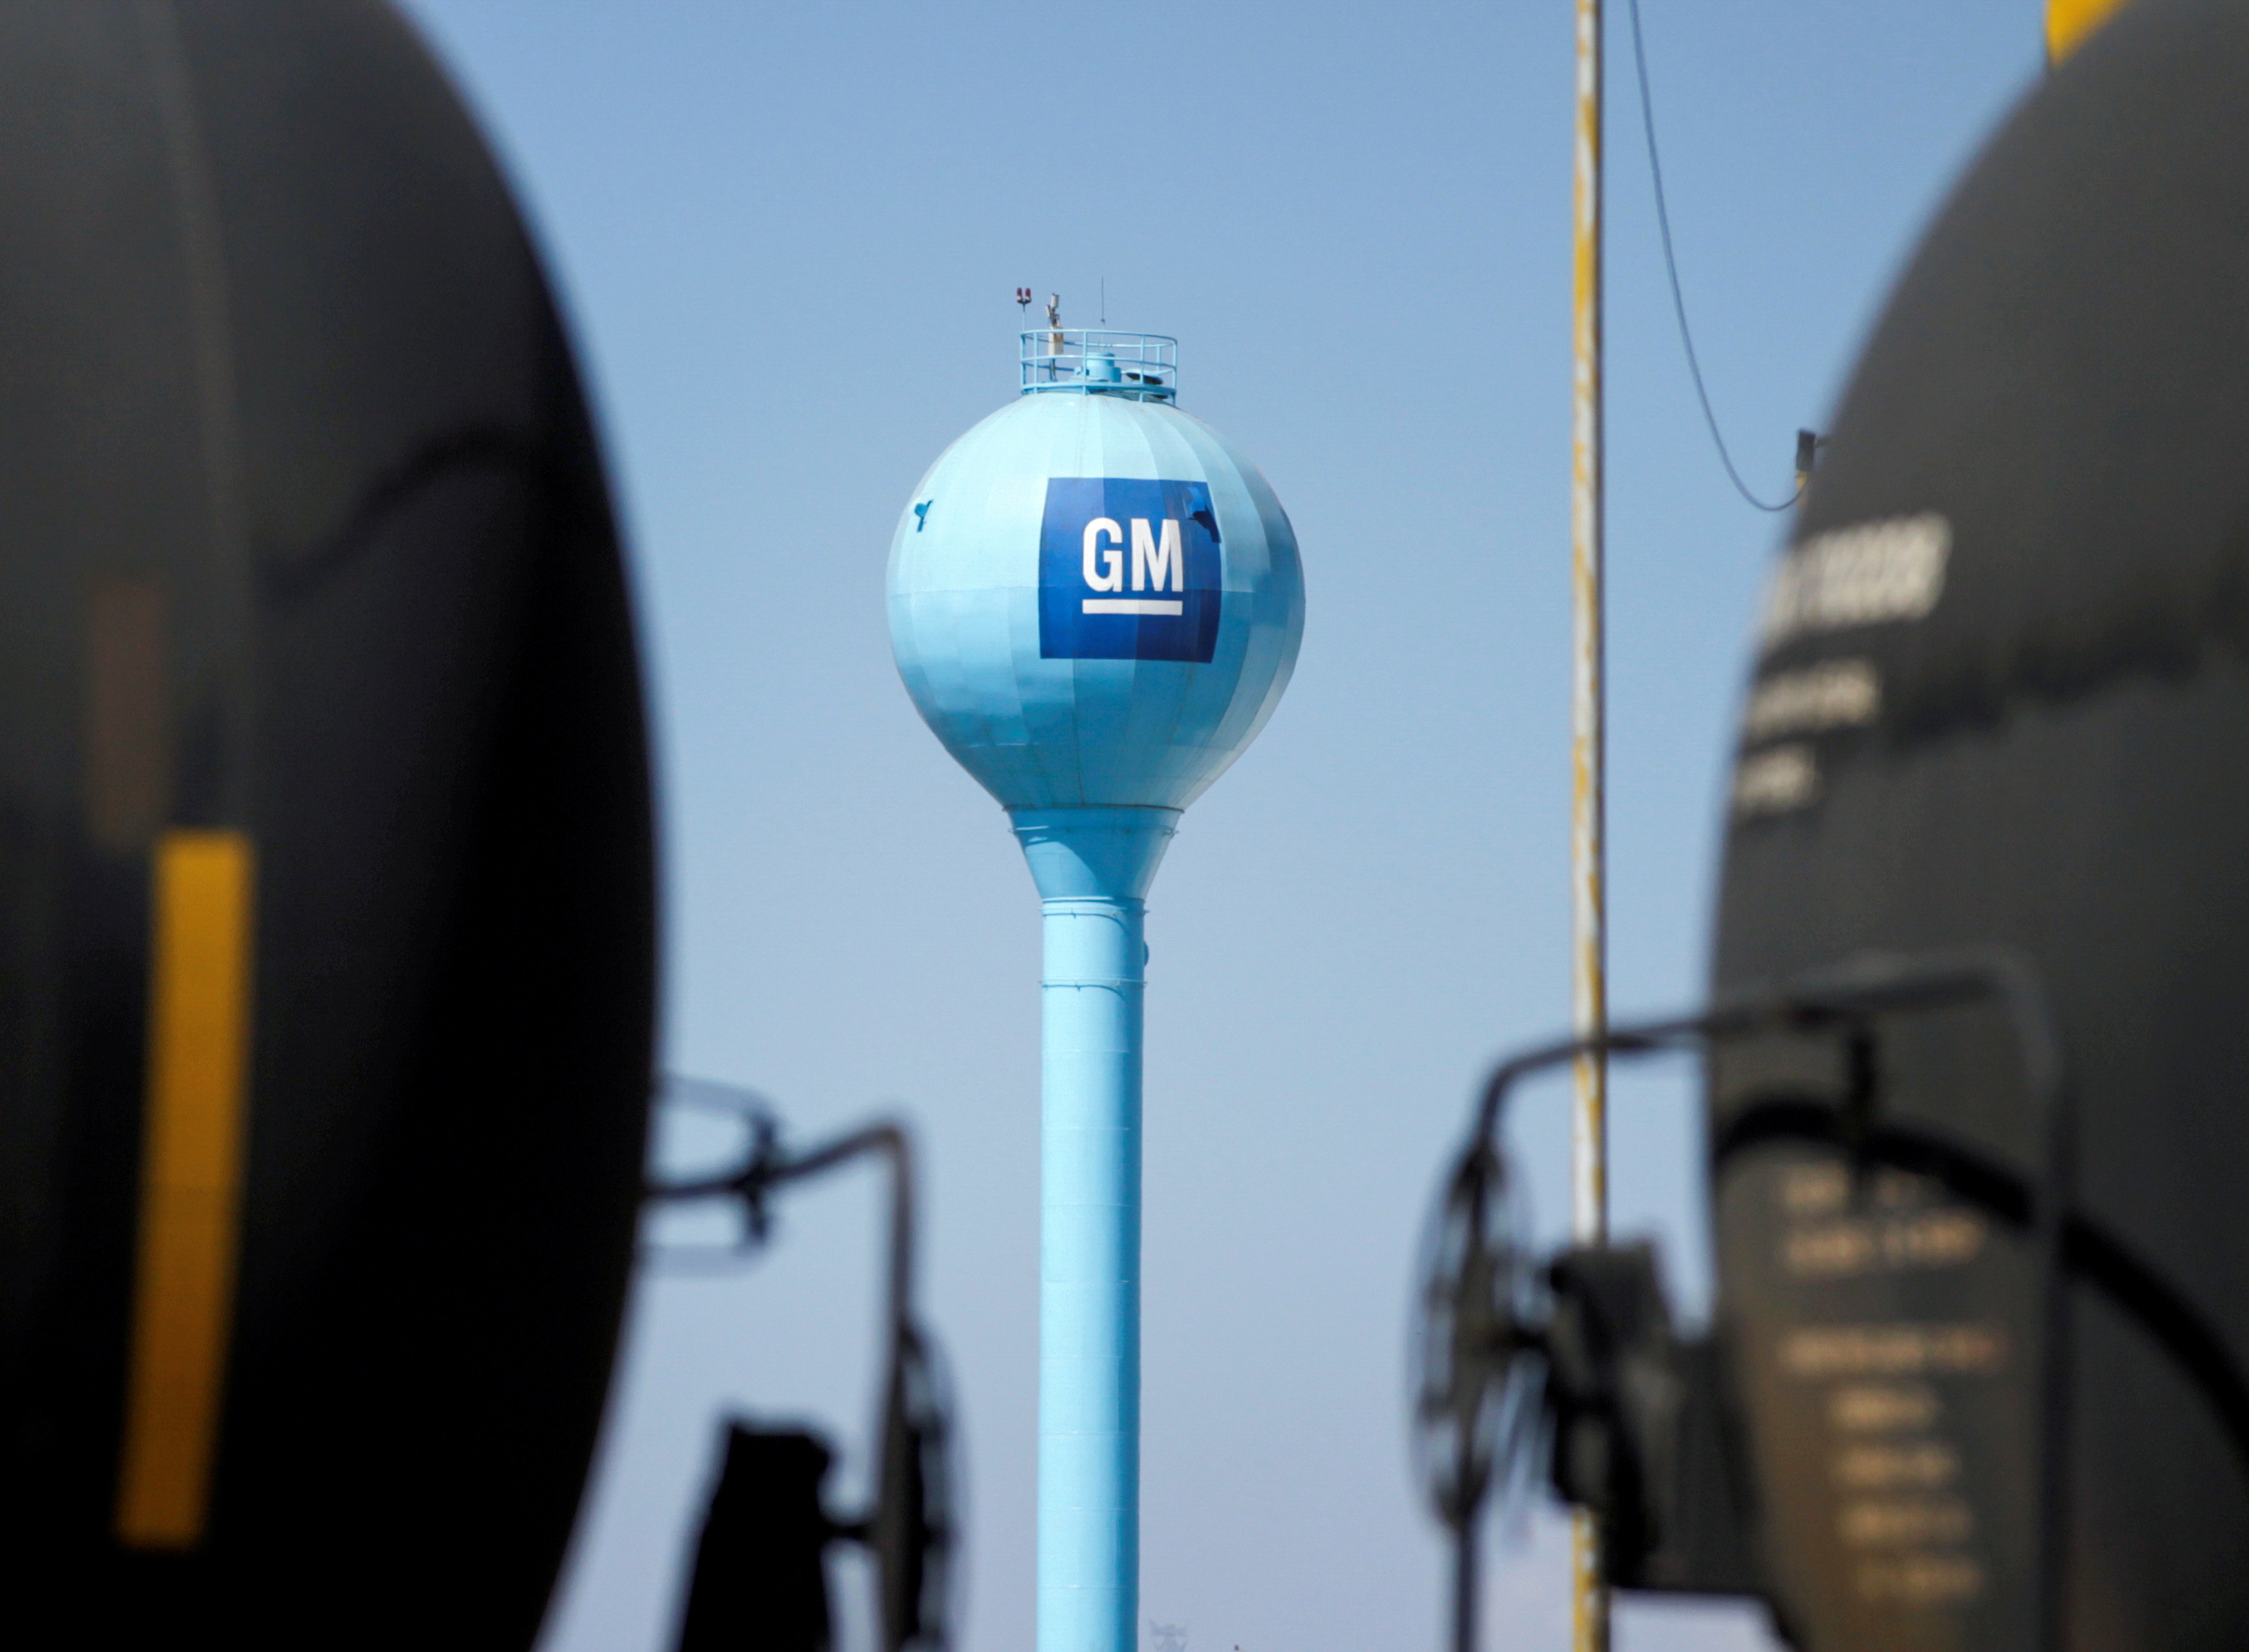 The GM logo is seen on a water tank of the General Motors assembly plant in Ramos Arizpe